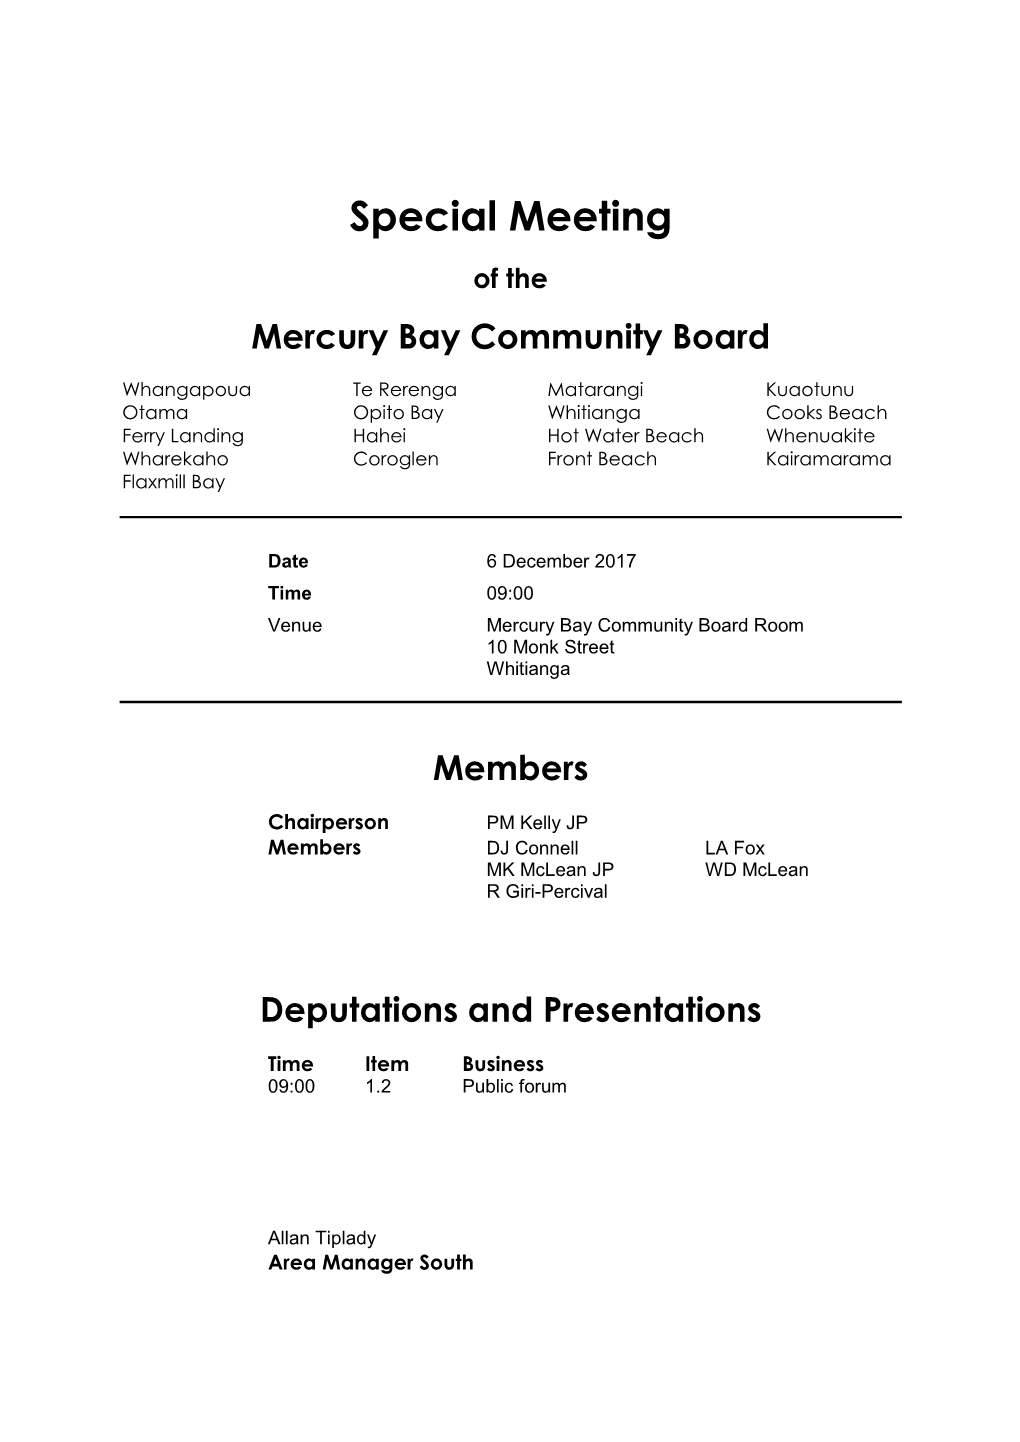 Special Meeting of the Mercury Bay Community Board